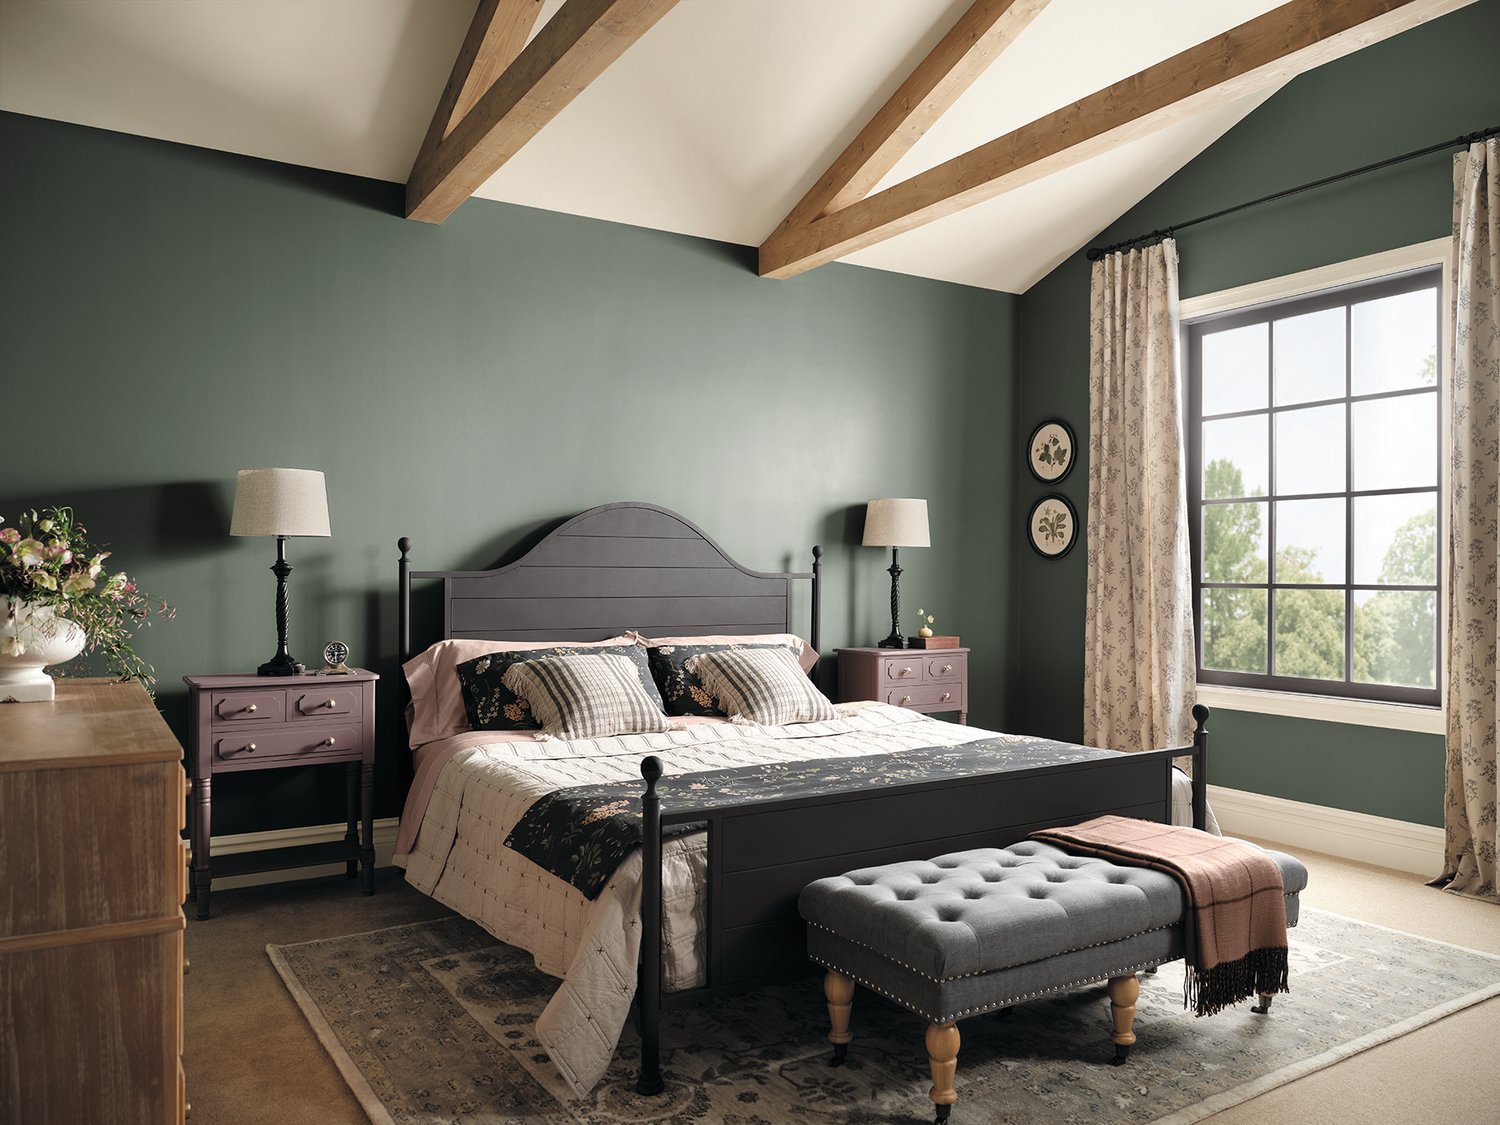 A clever use of color adds up to comfortable and comforting design in Sherwin Williams' Color Collection of the Year.